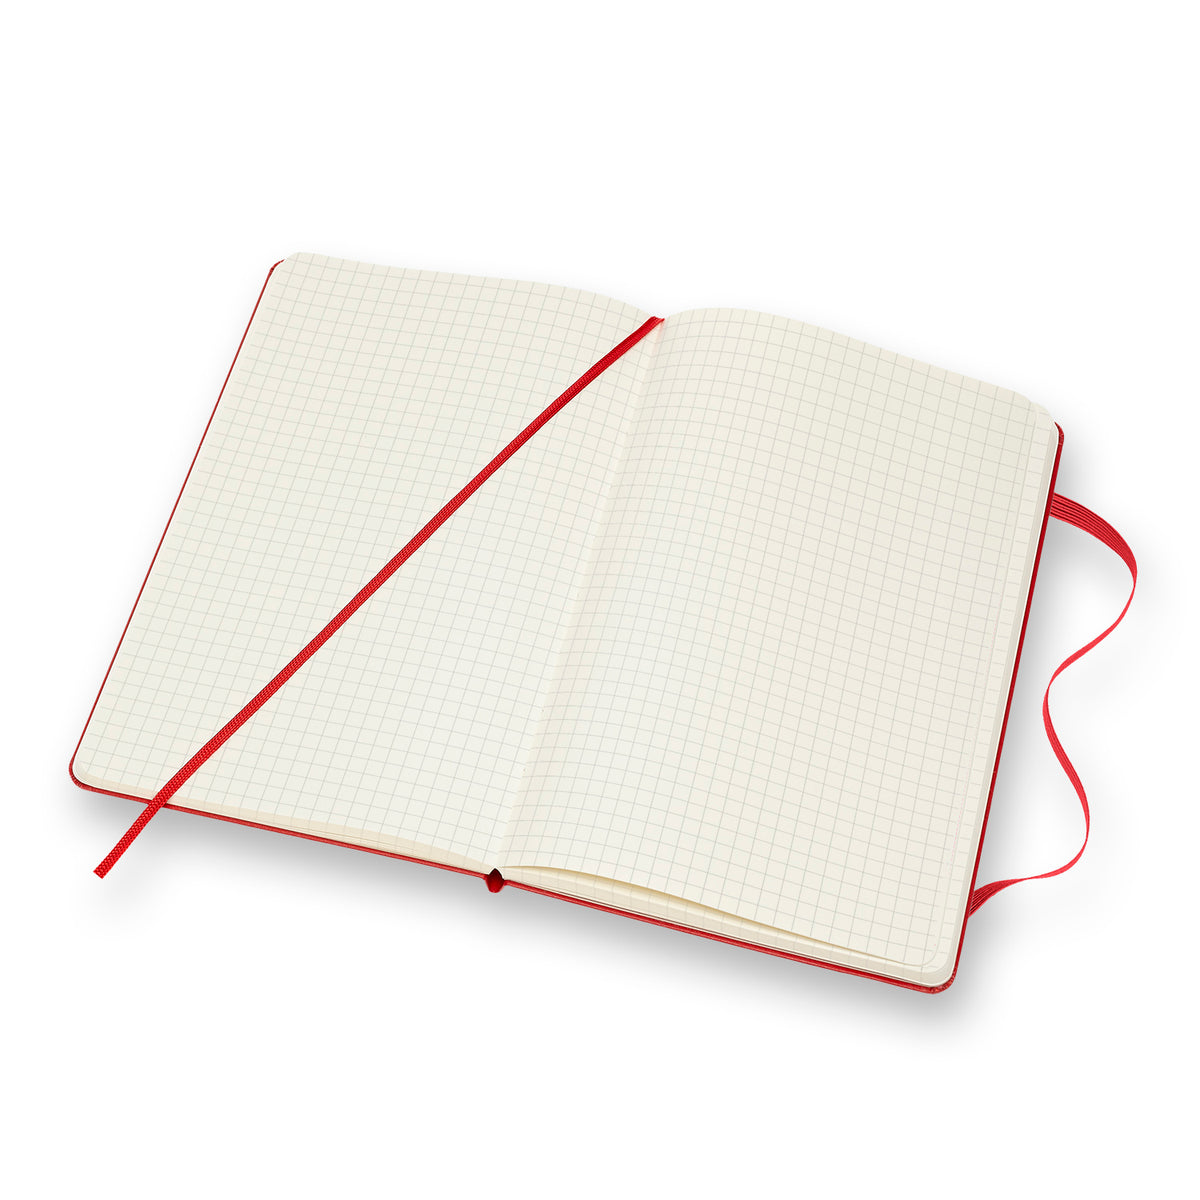 Moleskine - Classic Hard Cover Notebook - Grid - Large - Scarlet Red